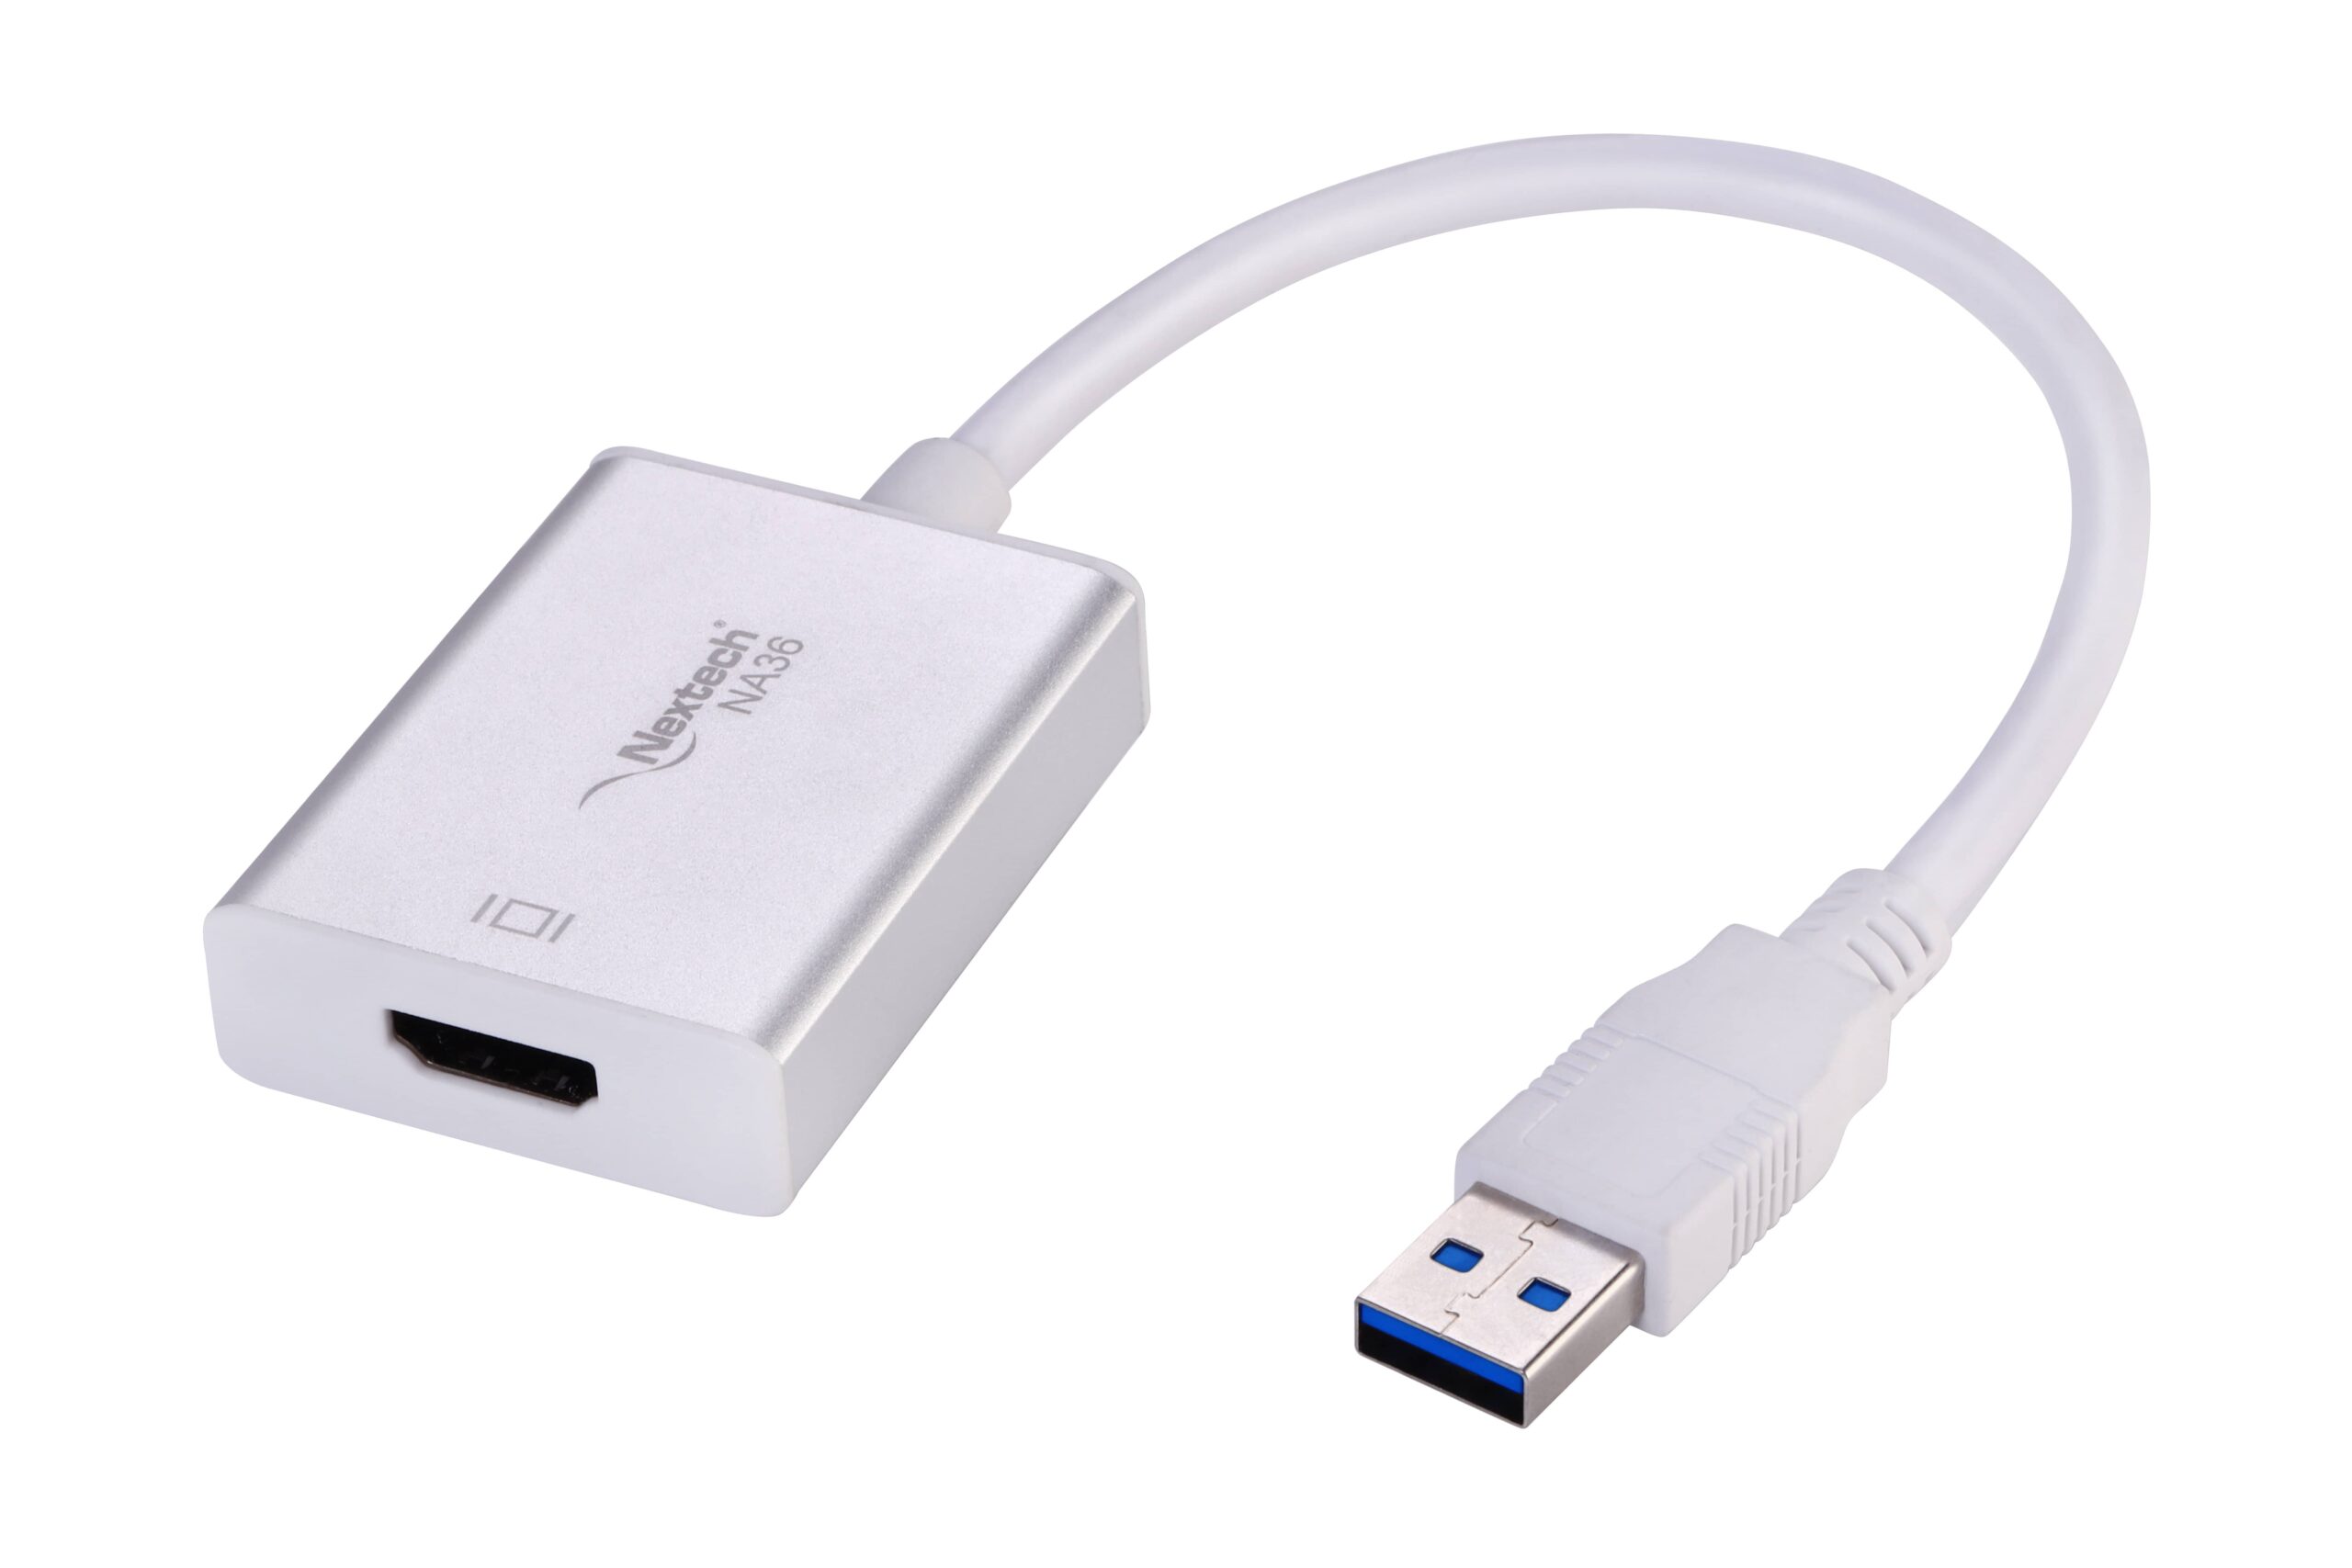 Driver for USB 3.0 to HDMI Adapter